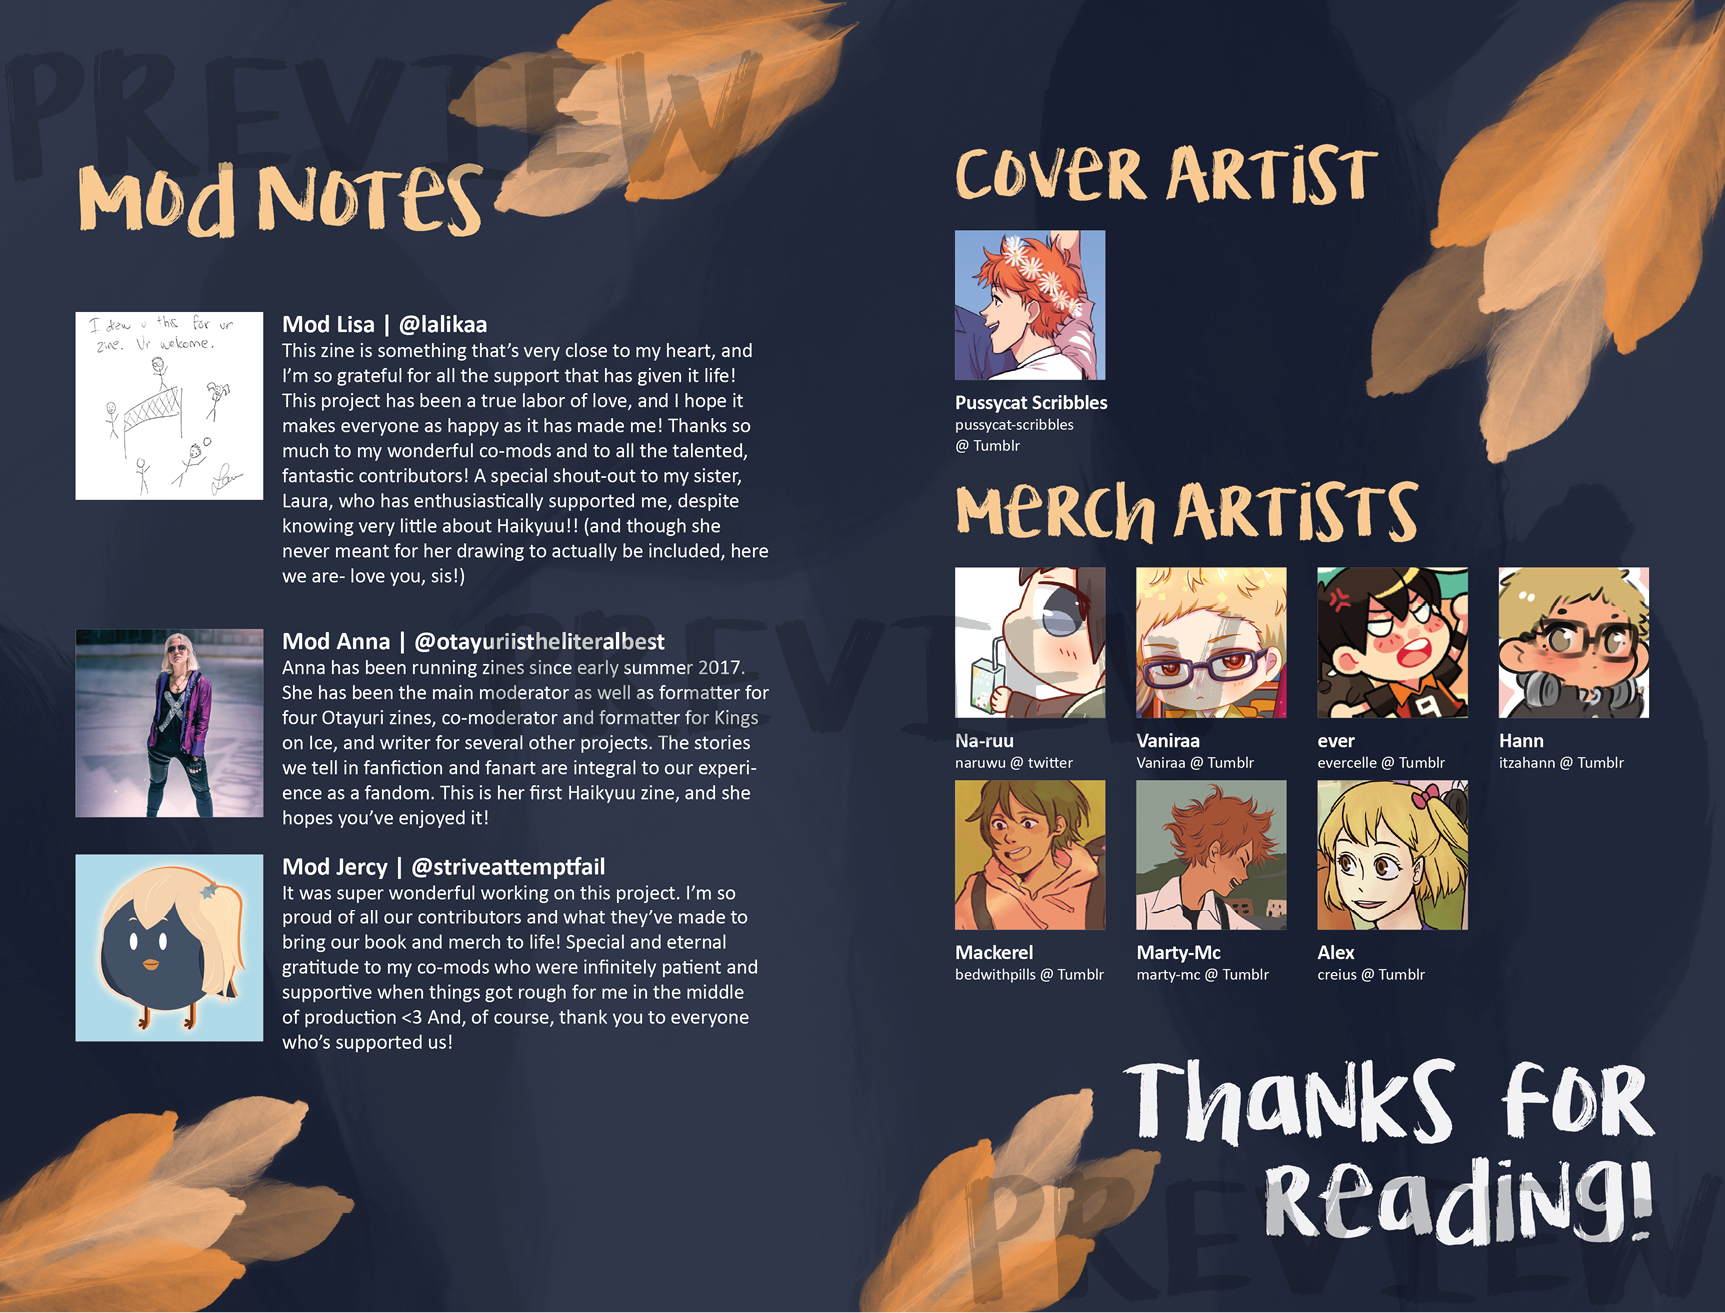 A screenshot of one of the digital zine's contributor spreads--Mod Notes on the left, and the merch and cover artists on the right.